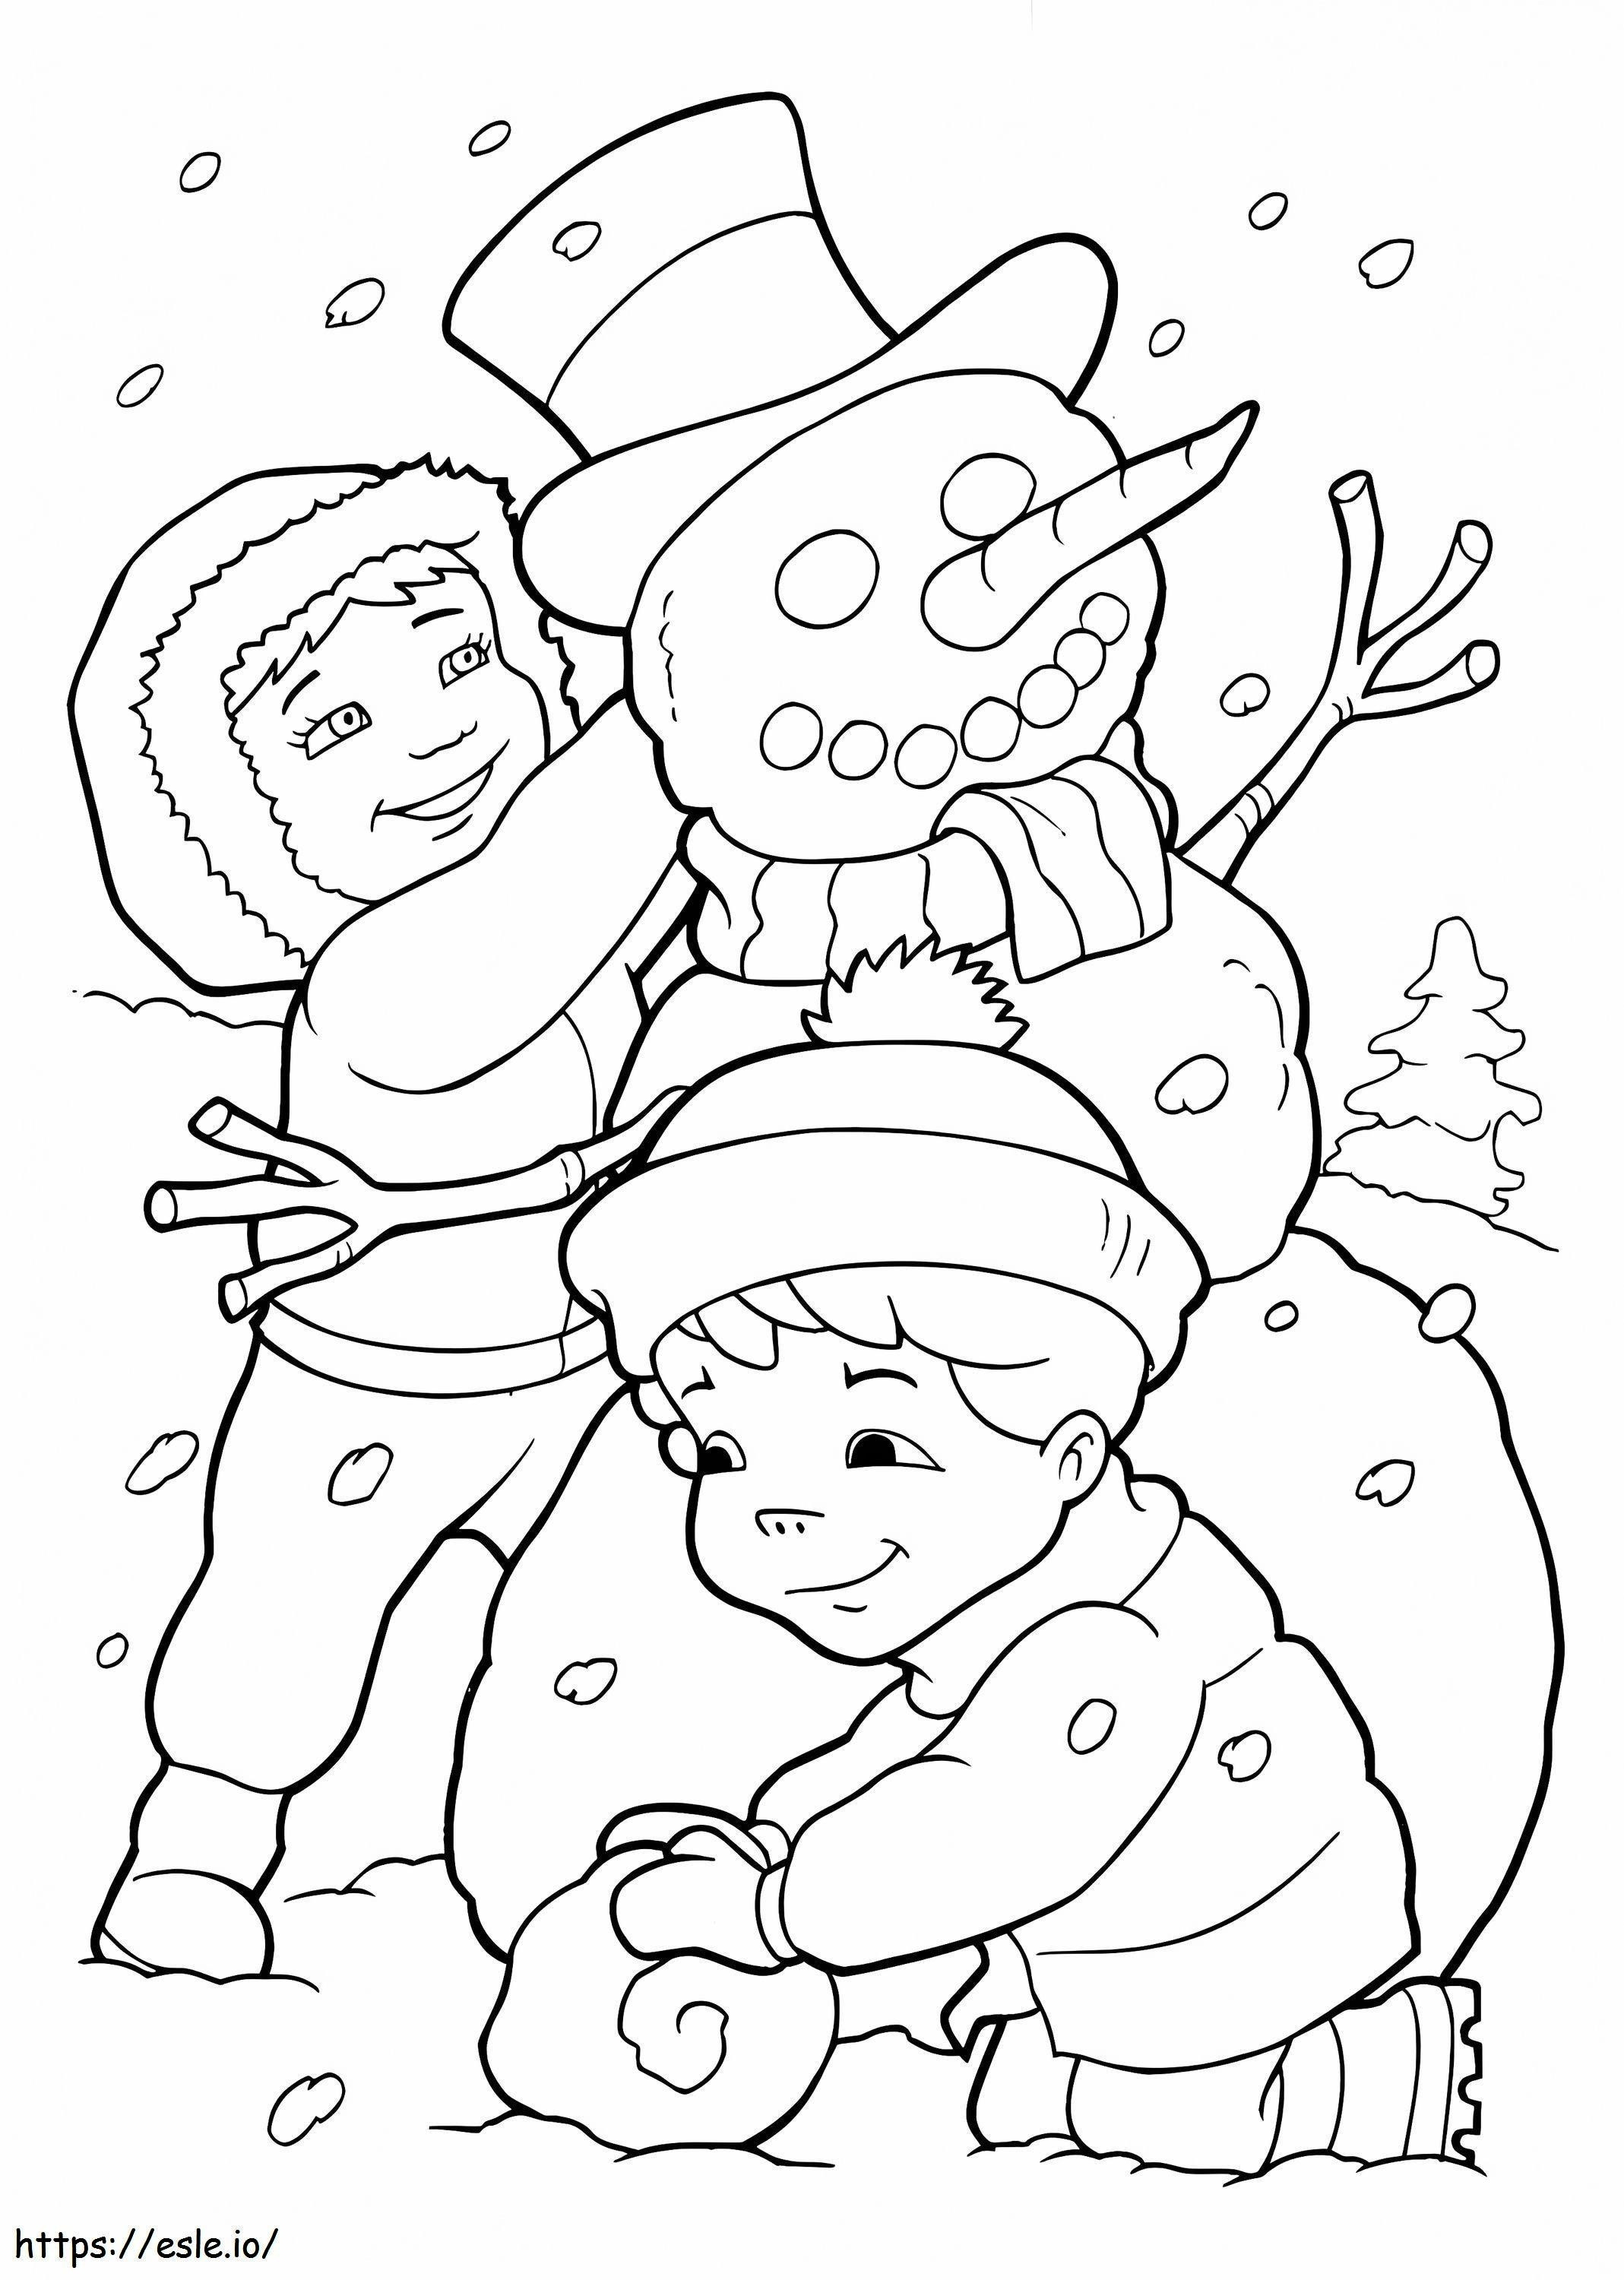 New Year For Emmy And Max coloring page